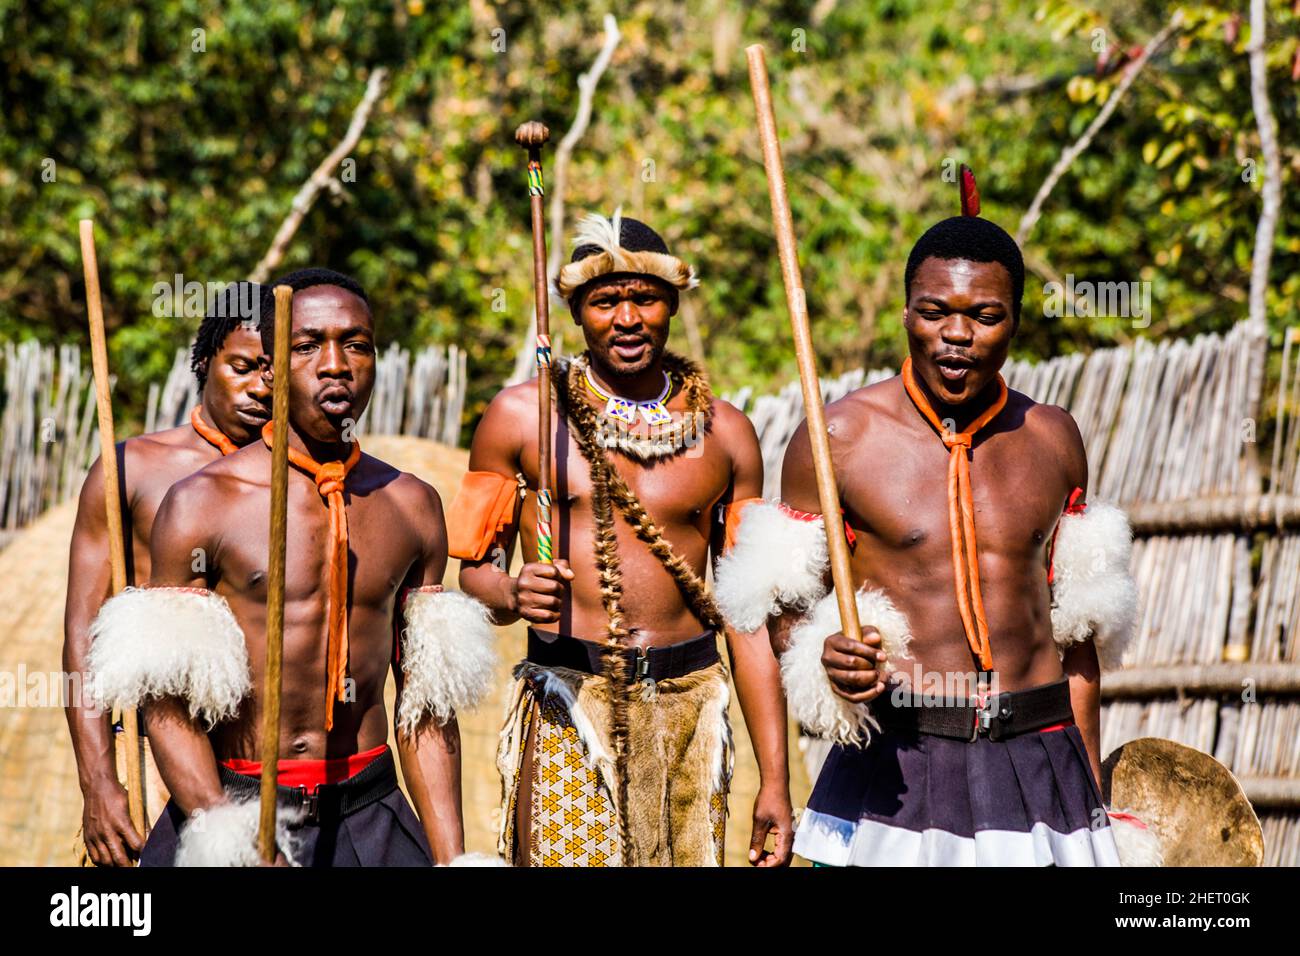 Insights into the lives of the Swazis, Swazi Cultural Village, Wildlife Sanctuary, Swaziland, eSwatini, South Africa, Milwane Stock Photo